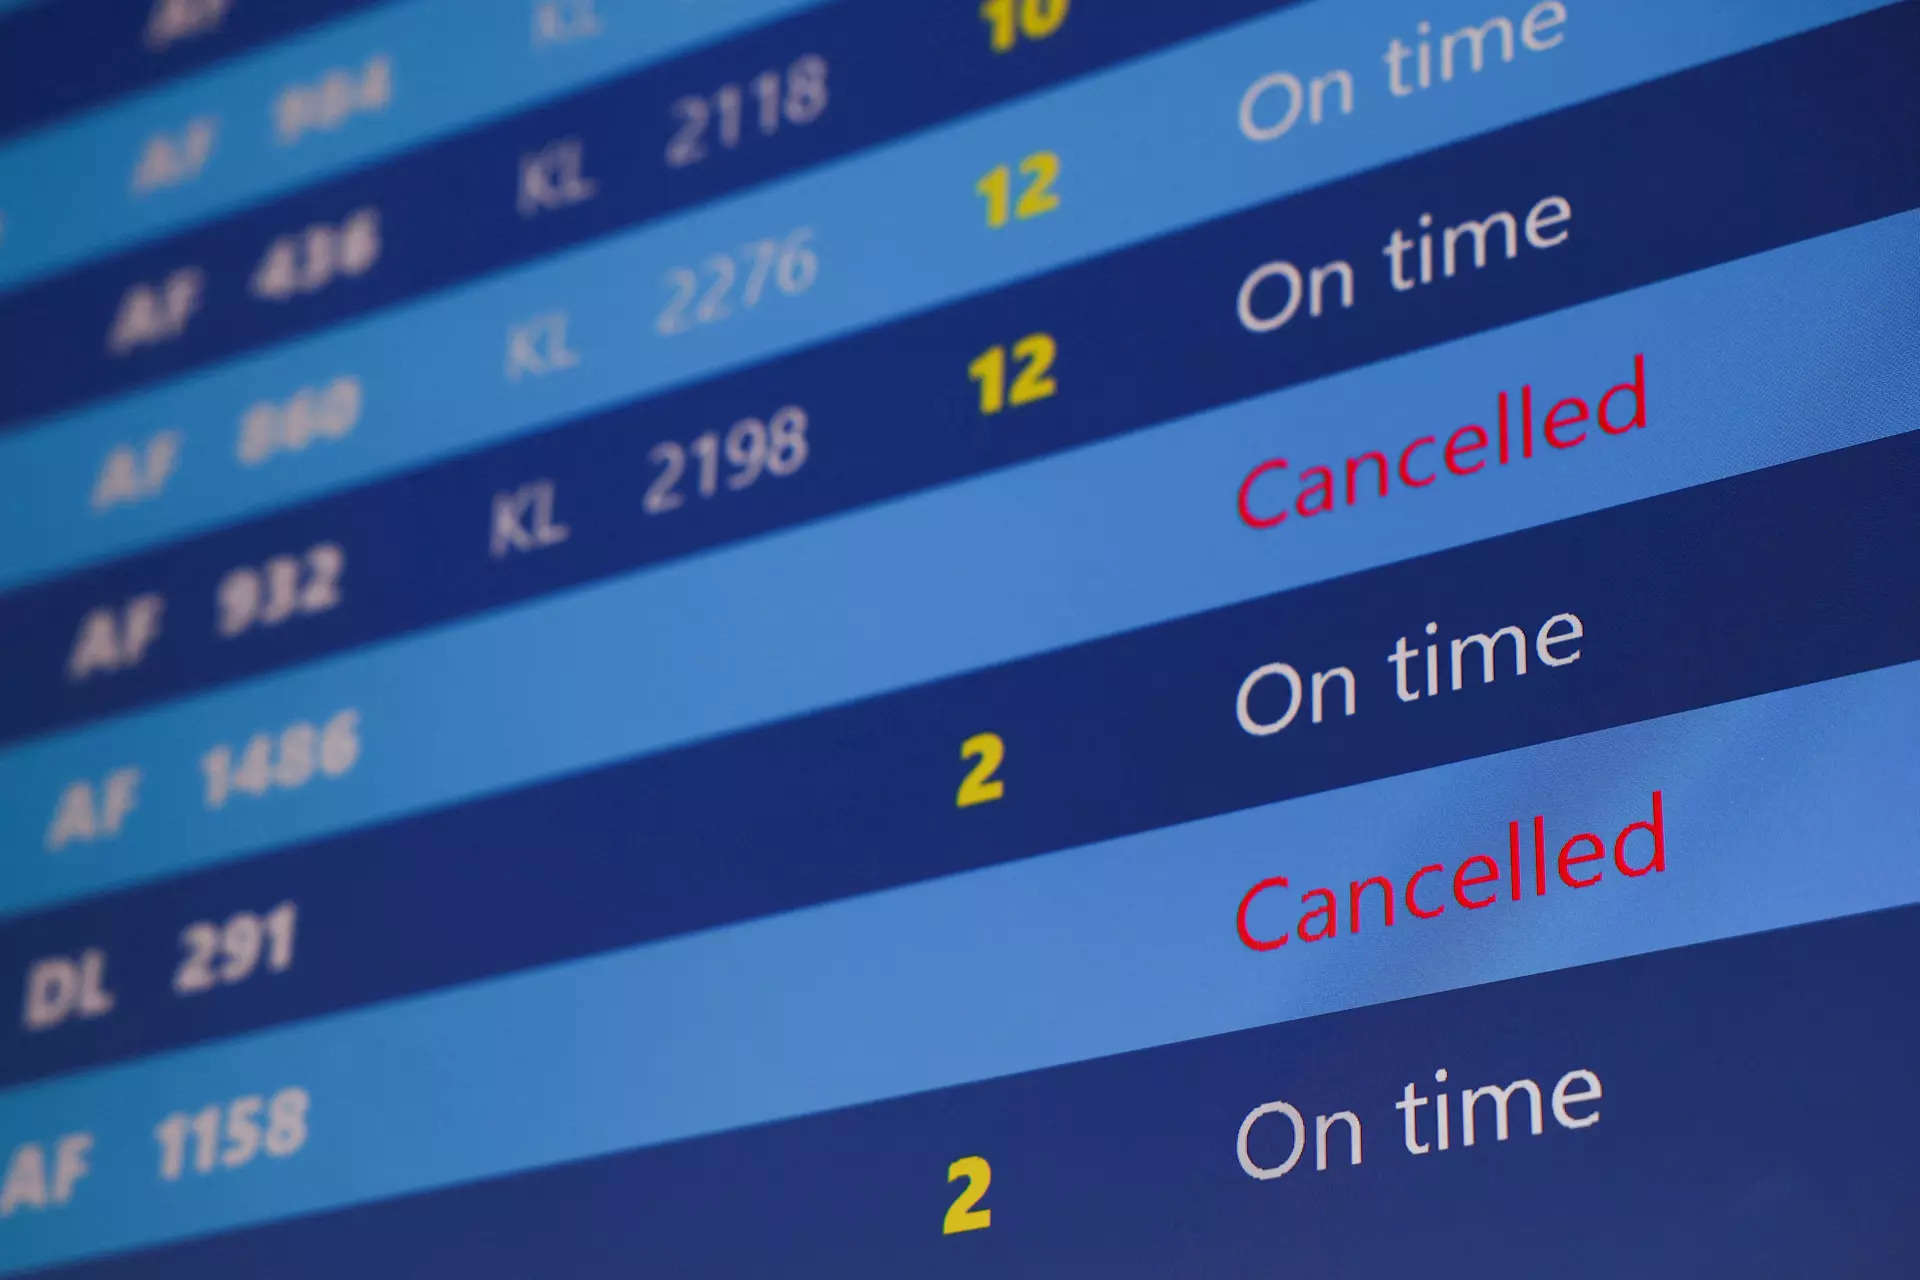 Bad weather returns to UAE, several flights cancelled